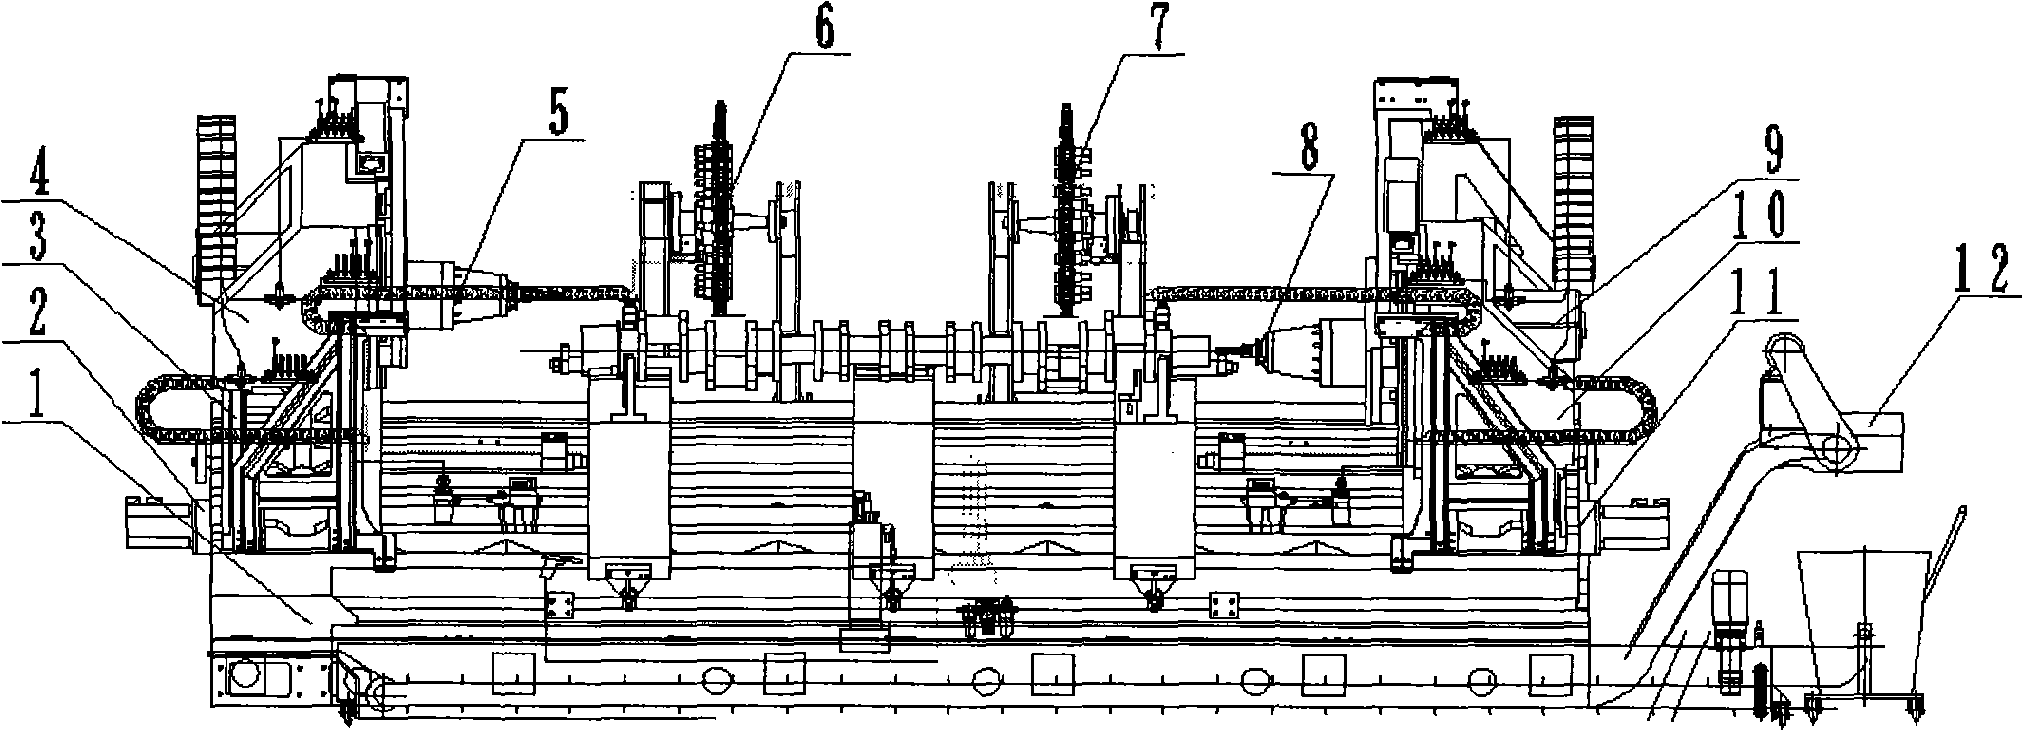 Double-magazine double main-shaft machine tool for processing two-end holes of crankshaft